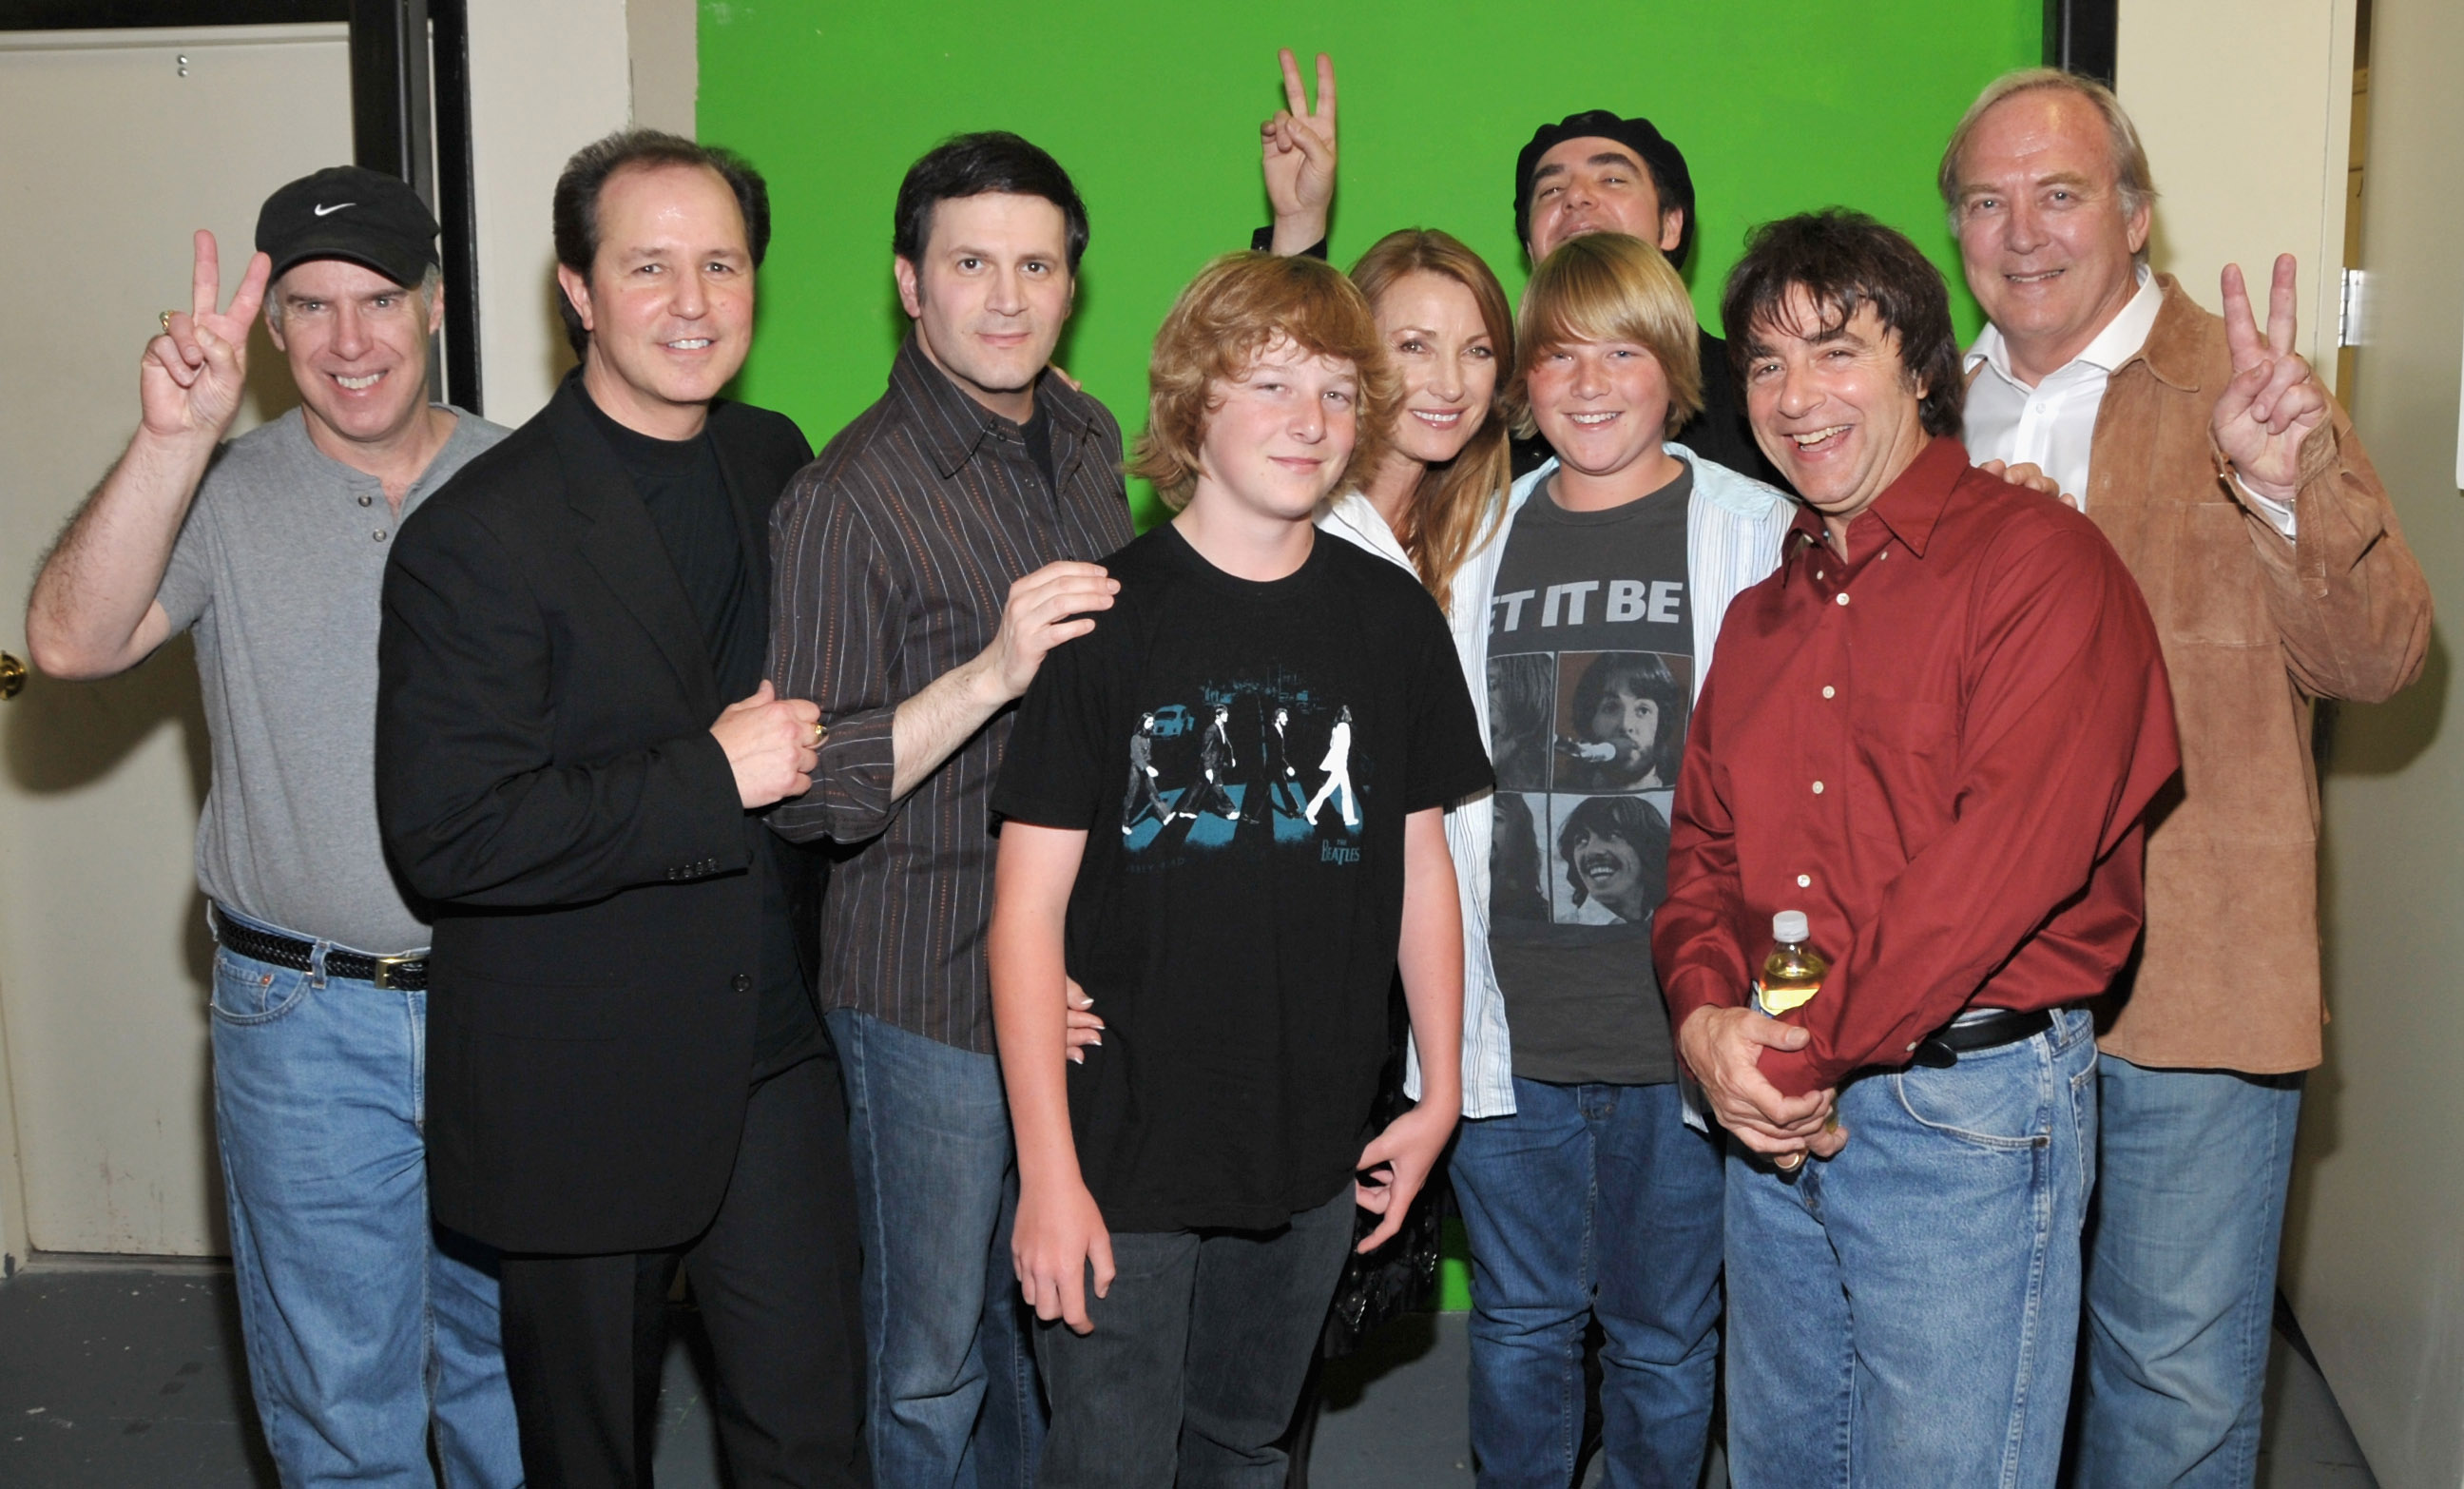 (L-R) Mark Lewis (L) Joey Curatolo, Steve Landes, Jane Seymour, John Keach, Kristopher Keach, Joe Bithorn and Ralph Castelli and James Keach at "Rain: A Tribute To The Beatles" at The Pantages Theatre on April 4, 2009 in Hollywood, California. | Source: Getty Images